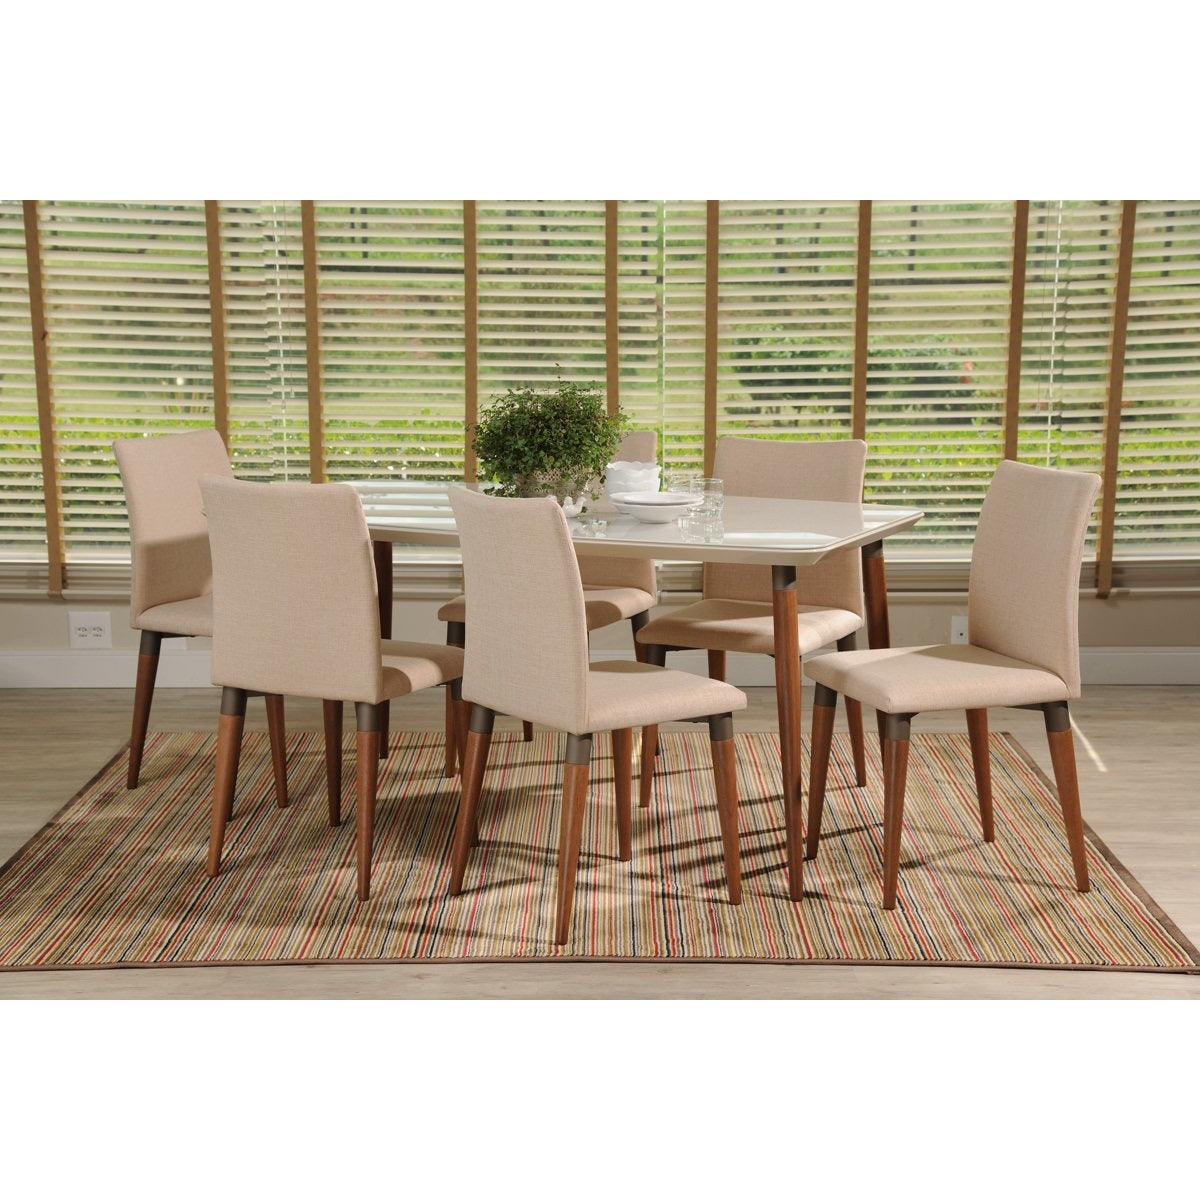 Manhattan Comfort 7-Piece Charles 62.99" Dining Set with 6 Dining Chairs in Off White and Dark Beige-Minimal & Modern